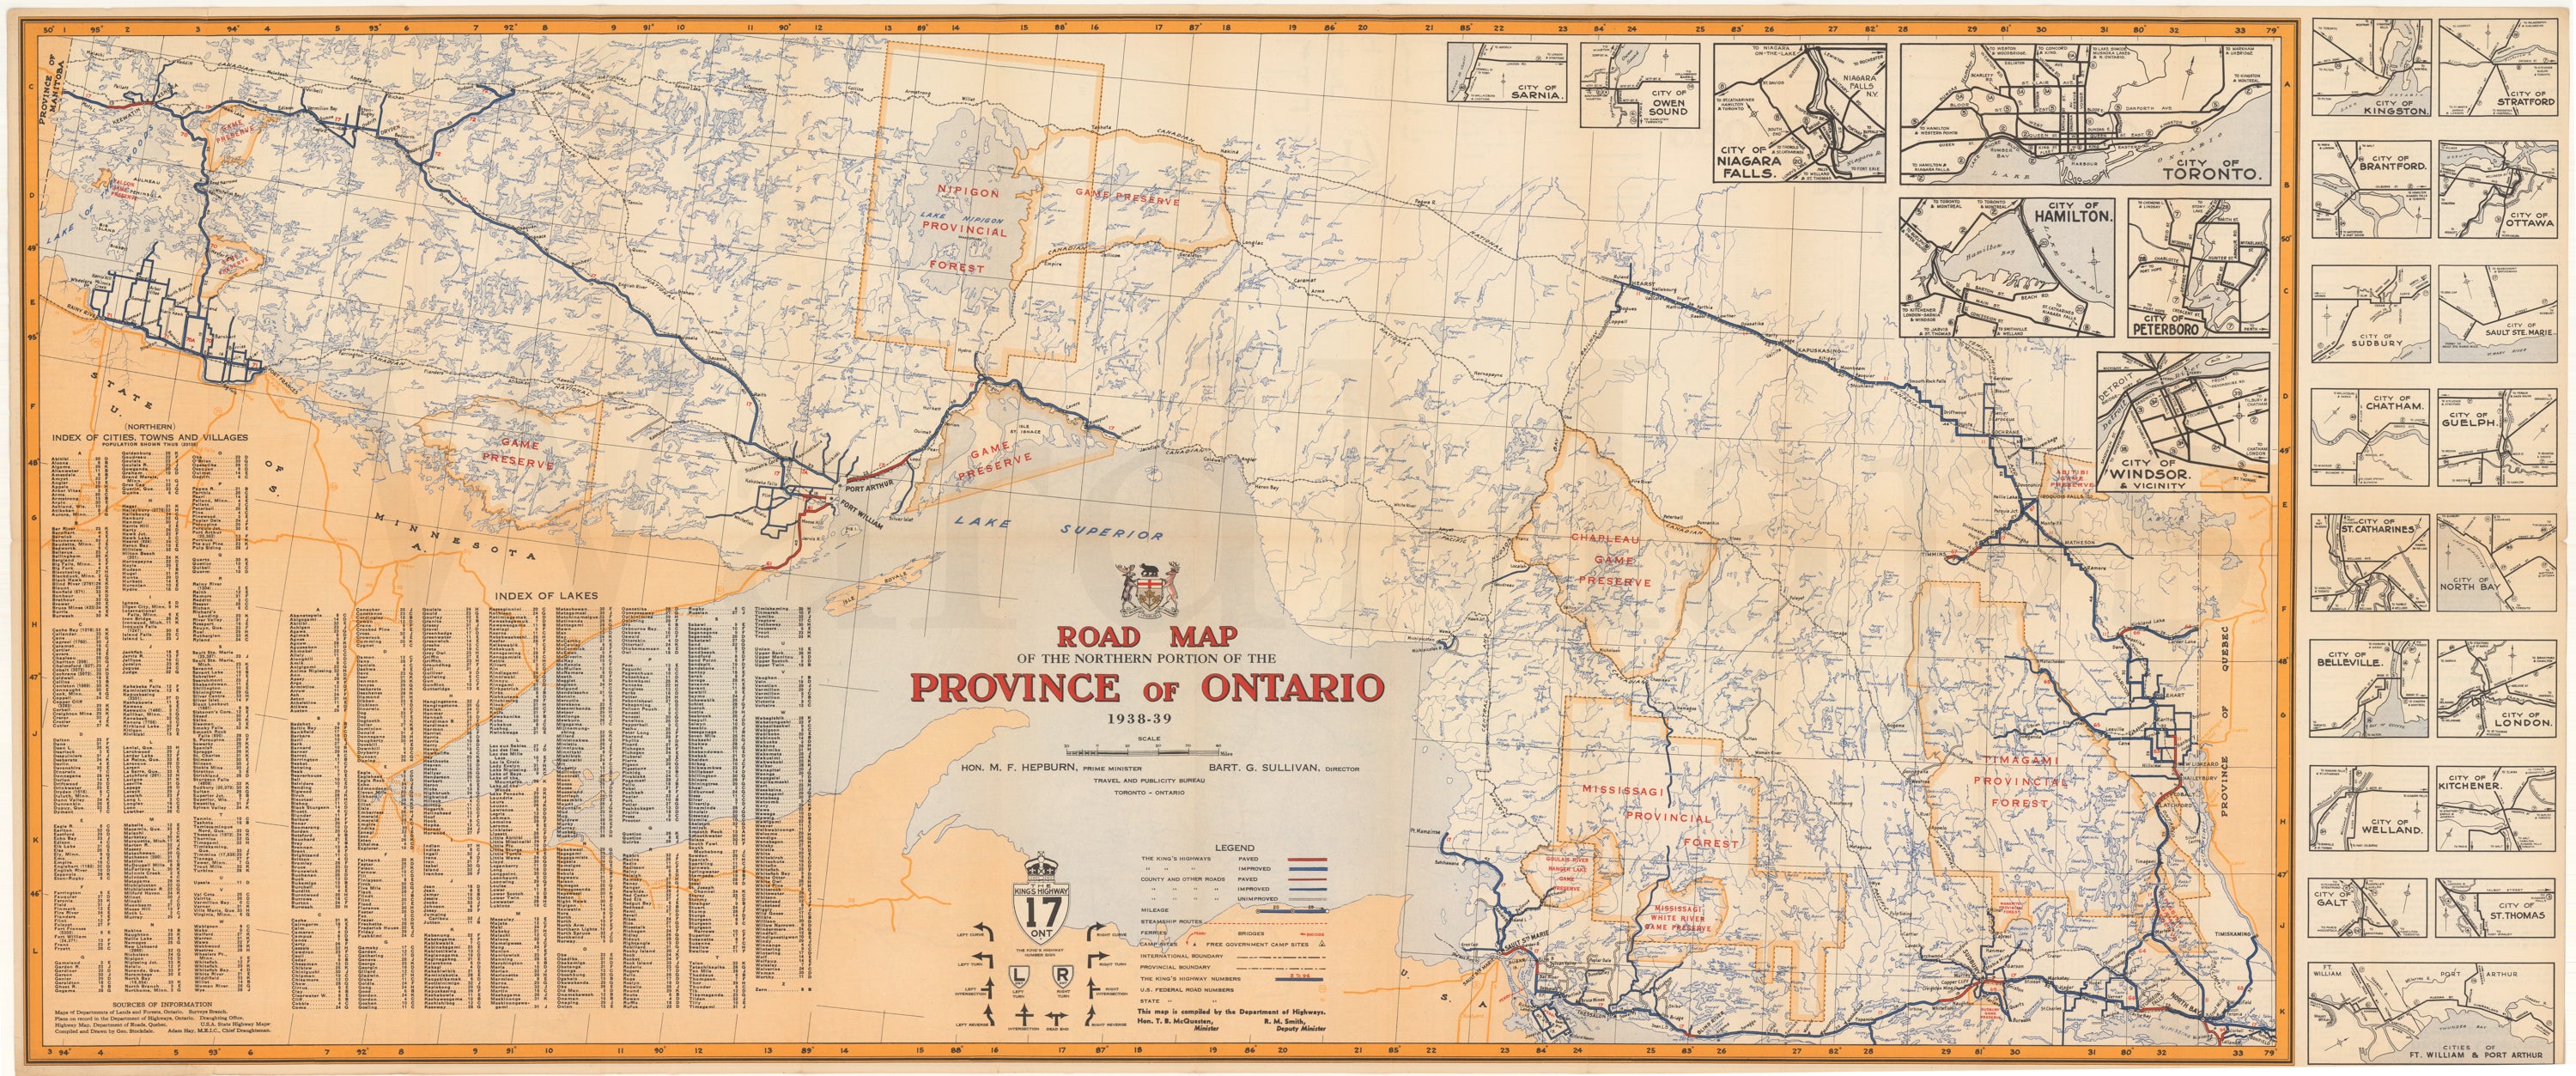 Ontario Road Map 1938-1939 (Southern Portion)